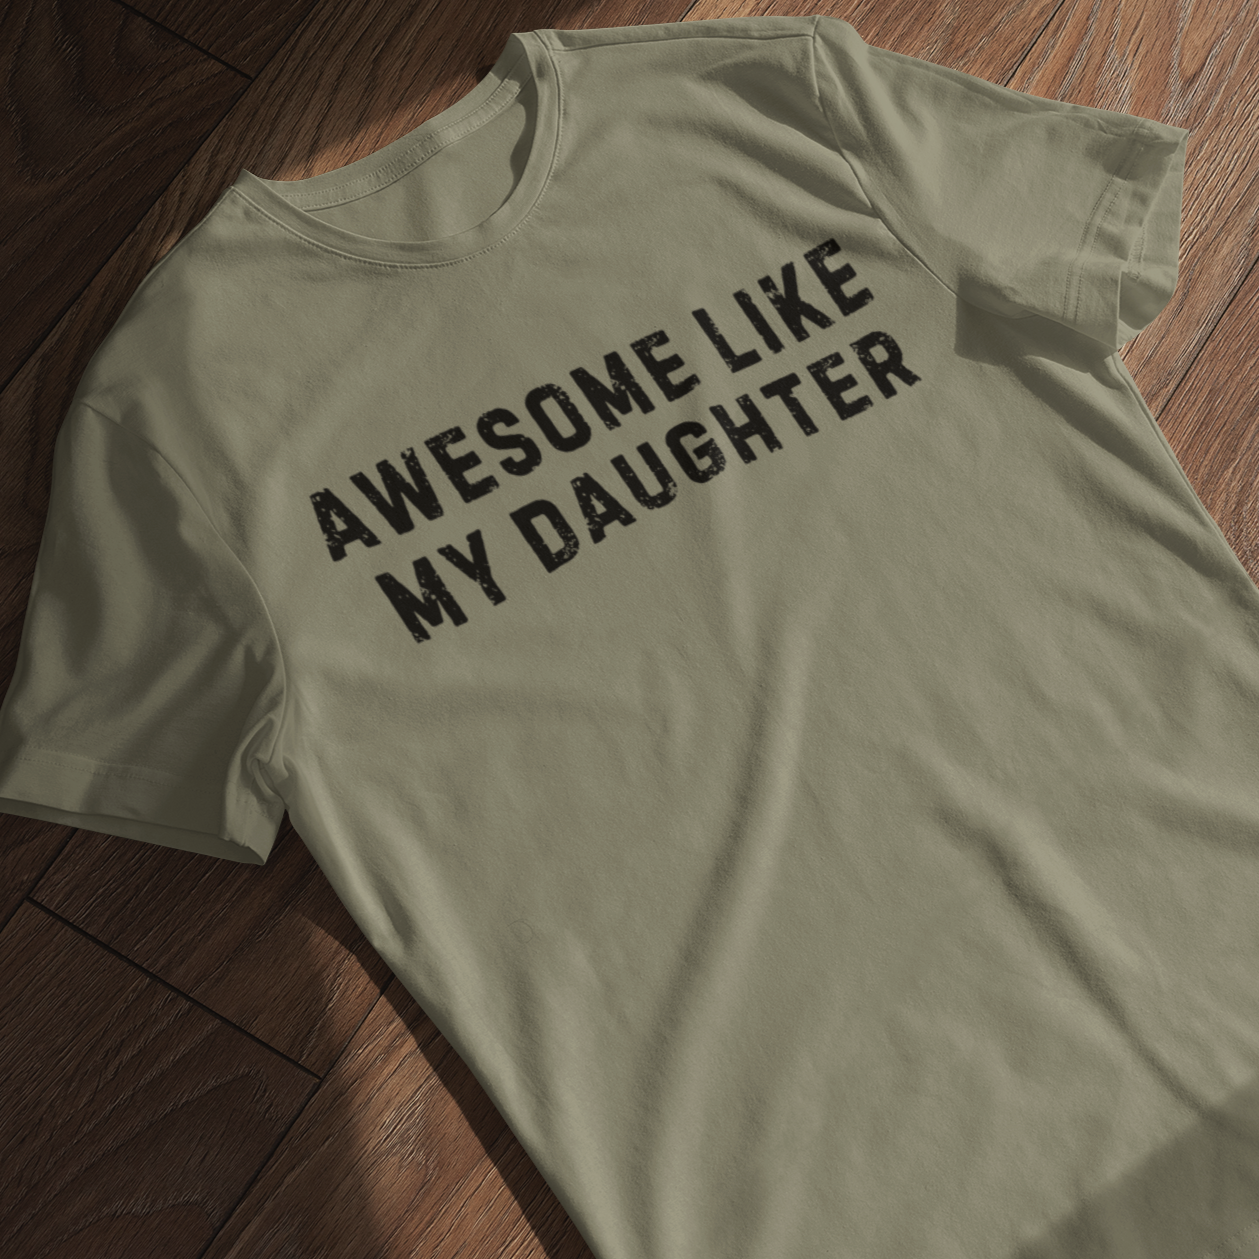 Awesome Like My Daughter Heather T-Shirt - Ultra-Soft Cotton-Poly Blend, Unisex Classic Fit